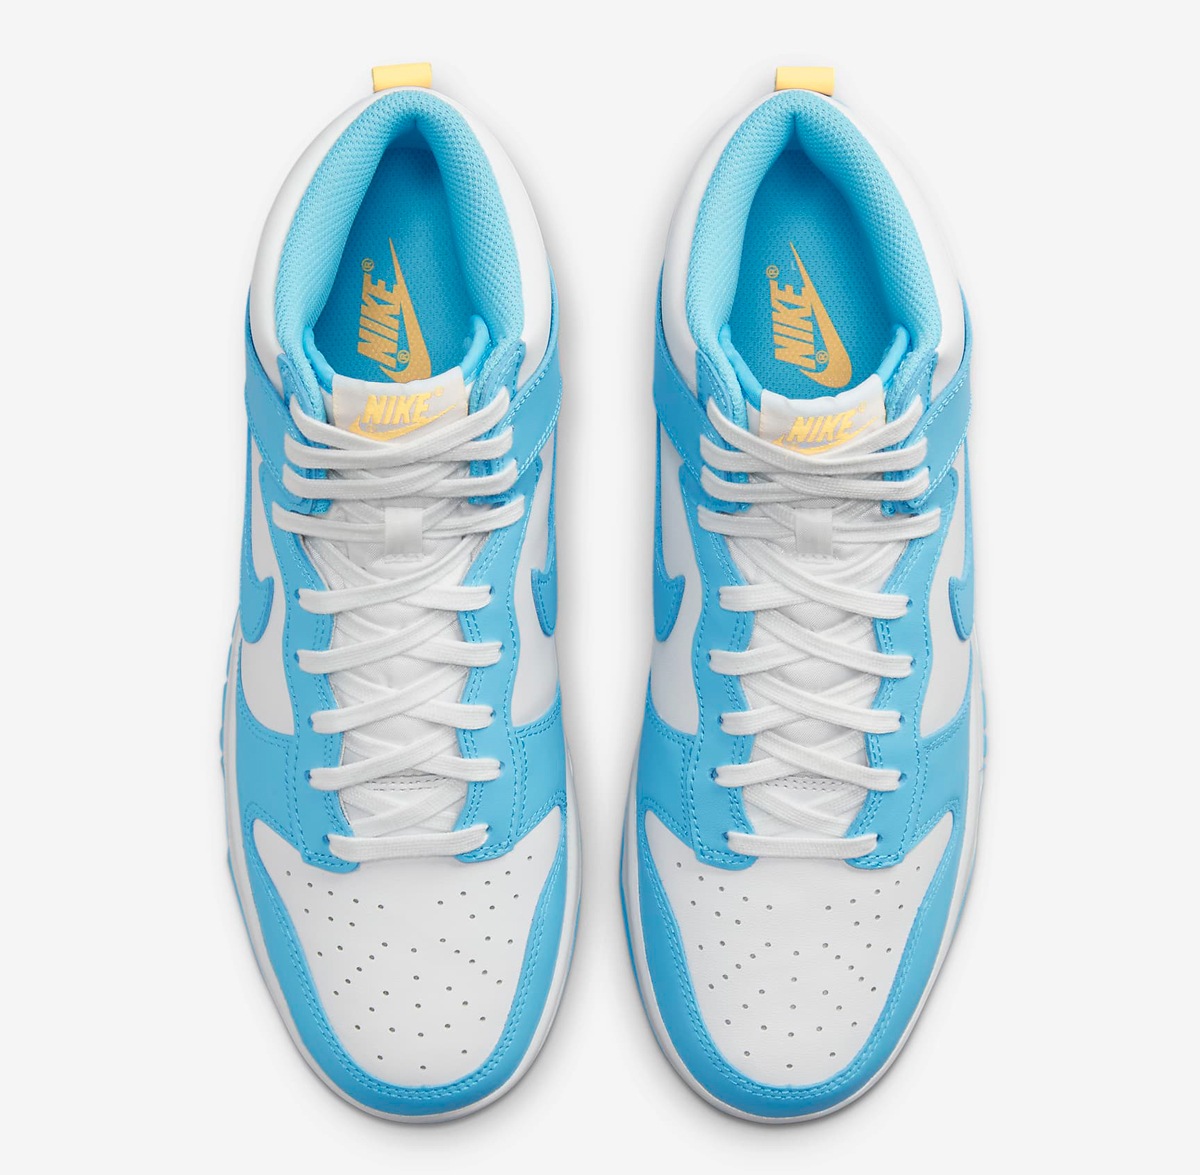 Nike-Dunk-High-Blue-Chill-Homer-Simpson-Where-to-Buy-4